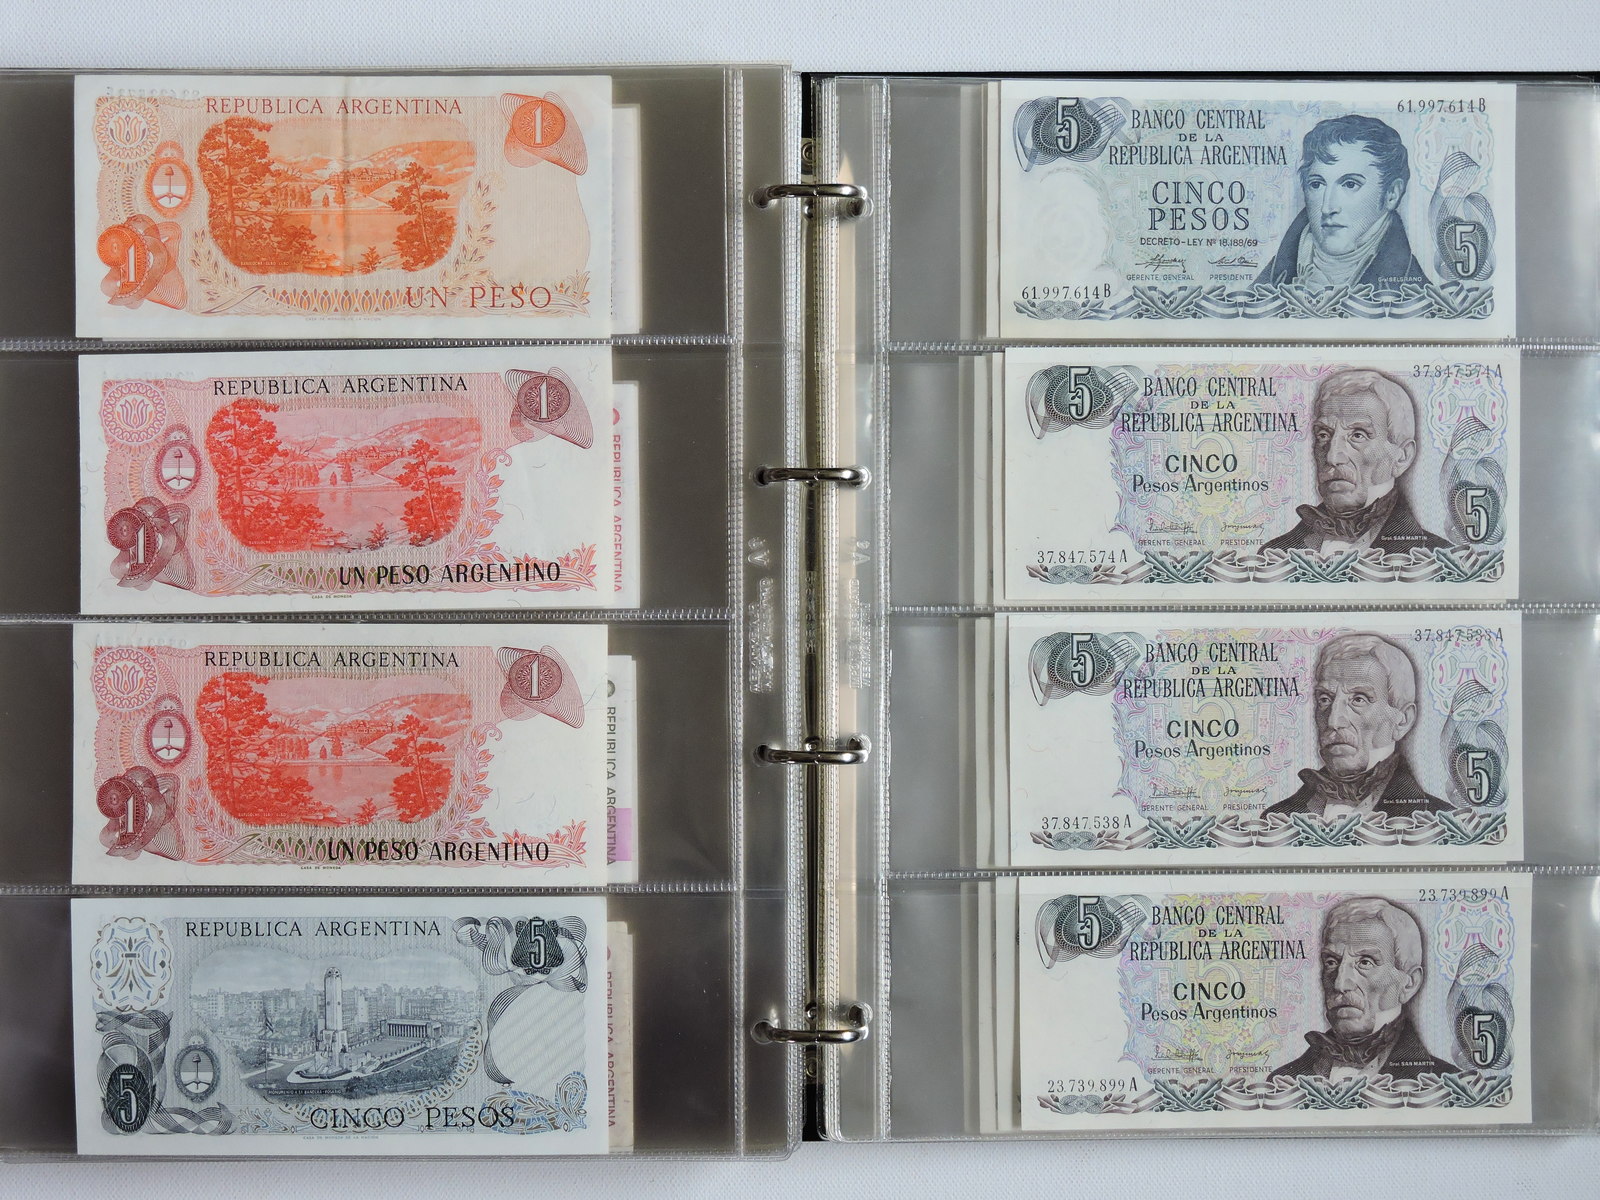 Banknotes, Brazil and Argentina
, page:34, item:1